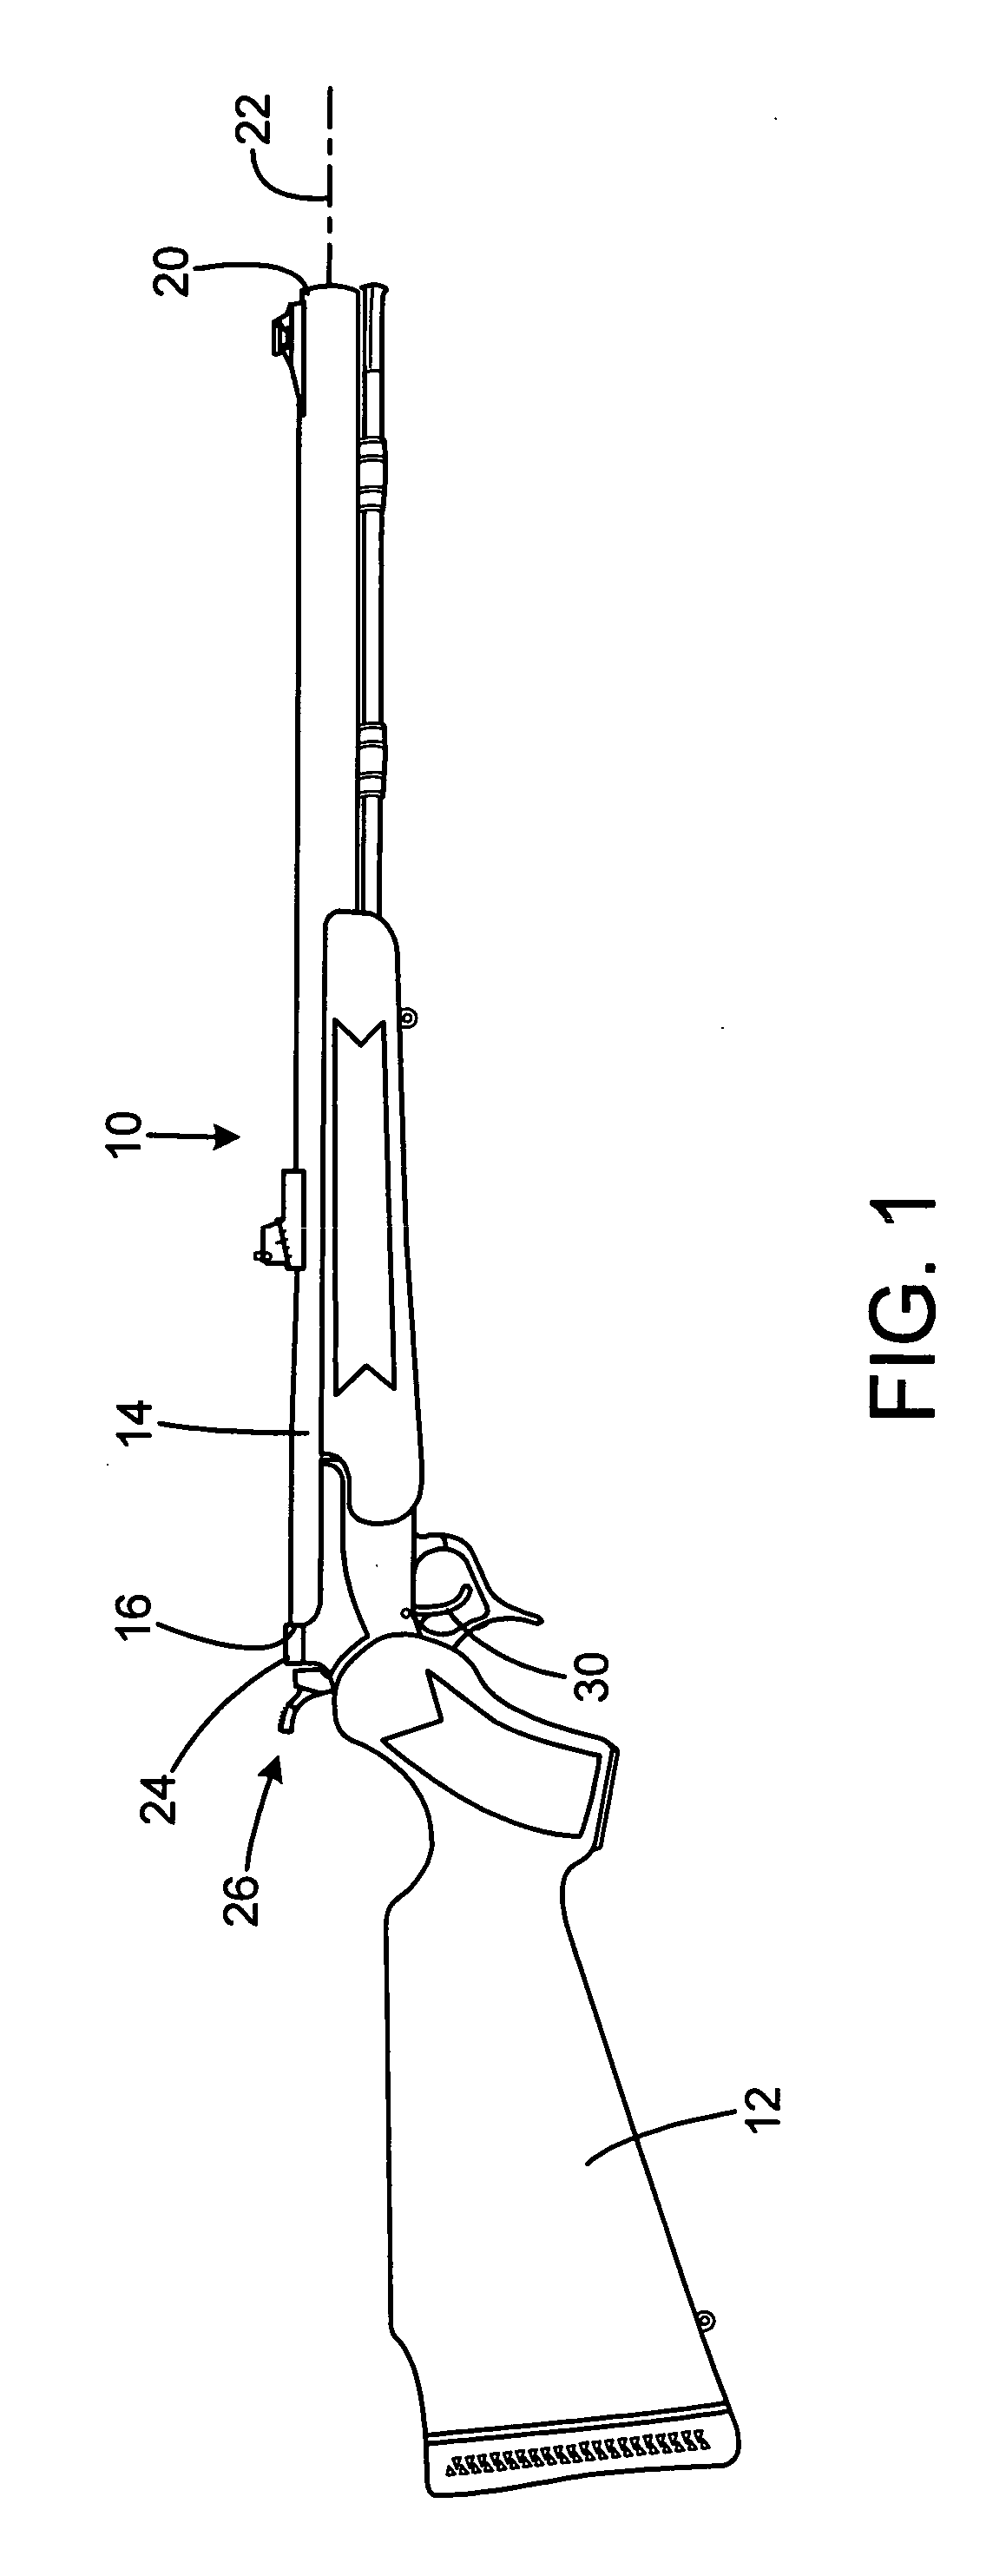 Lubricating apparatus for a threaded rifle breech